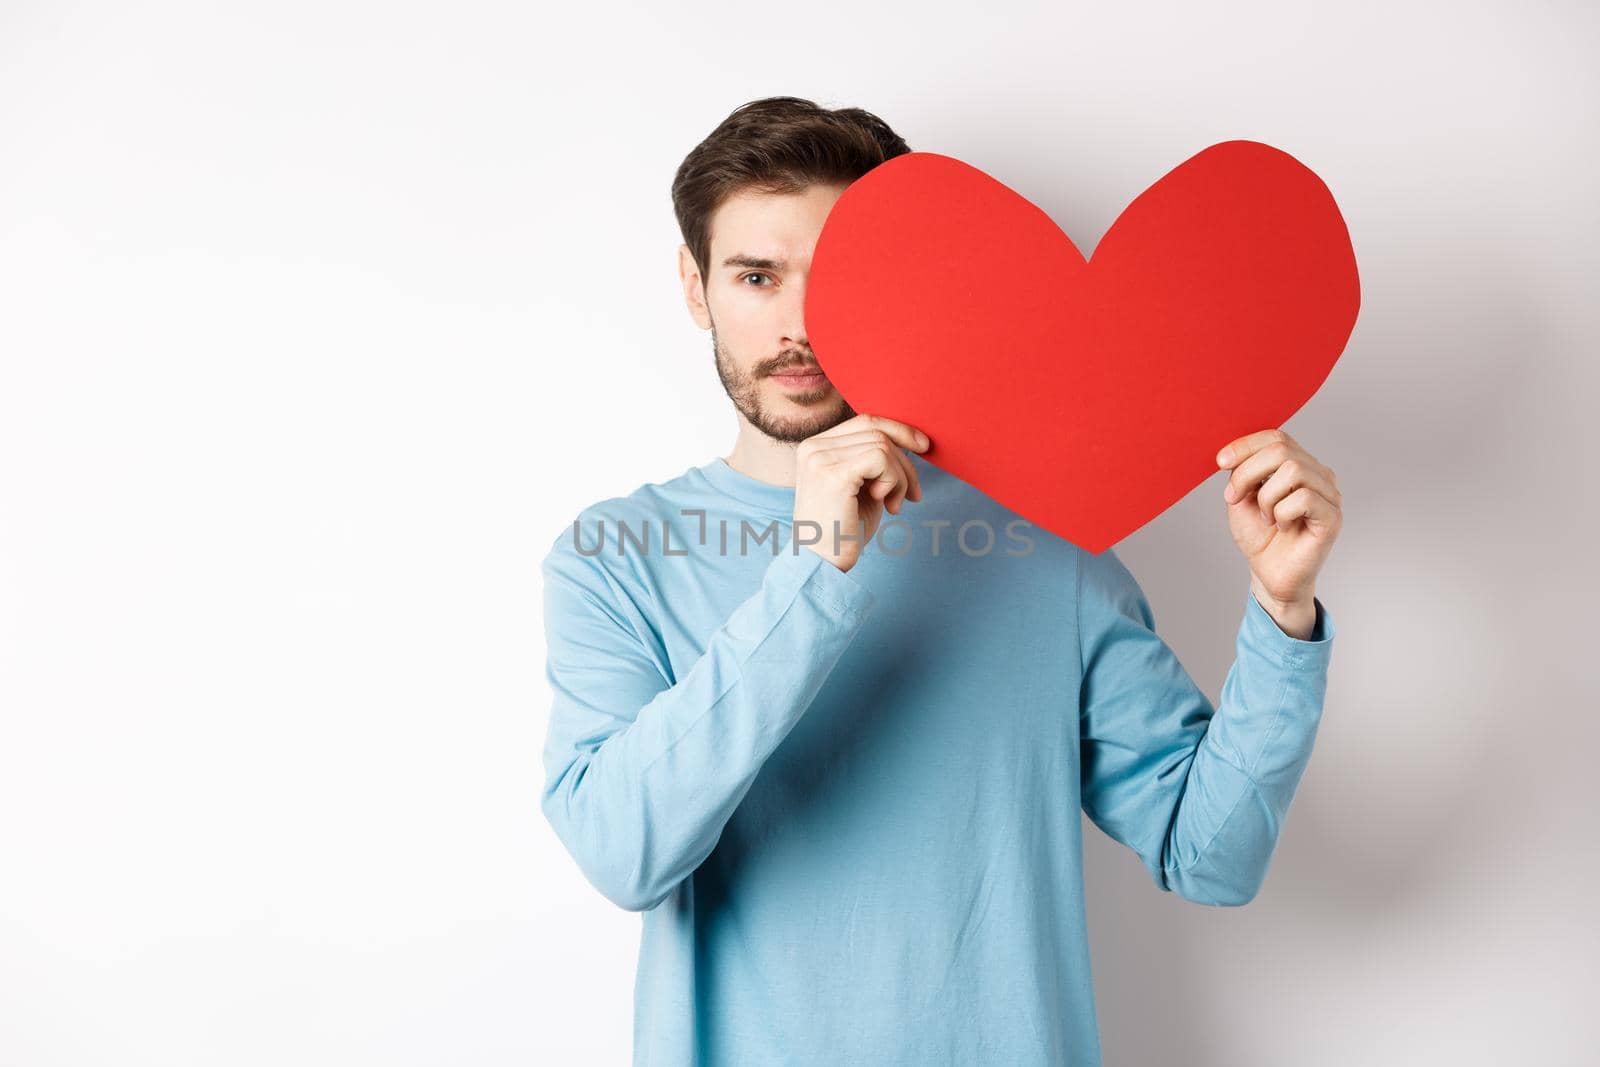 Young caucasian man holding Valentines day romantic heart, cover half of face with cutout and smiling, searching for love date, white background.